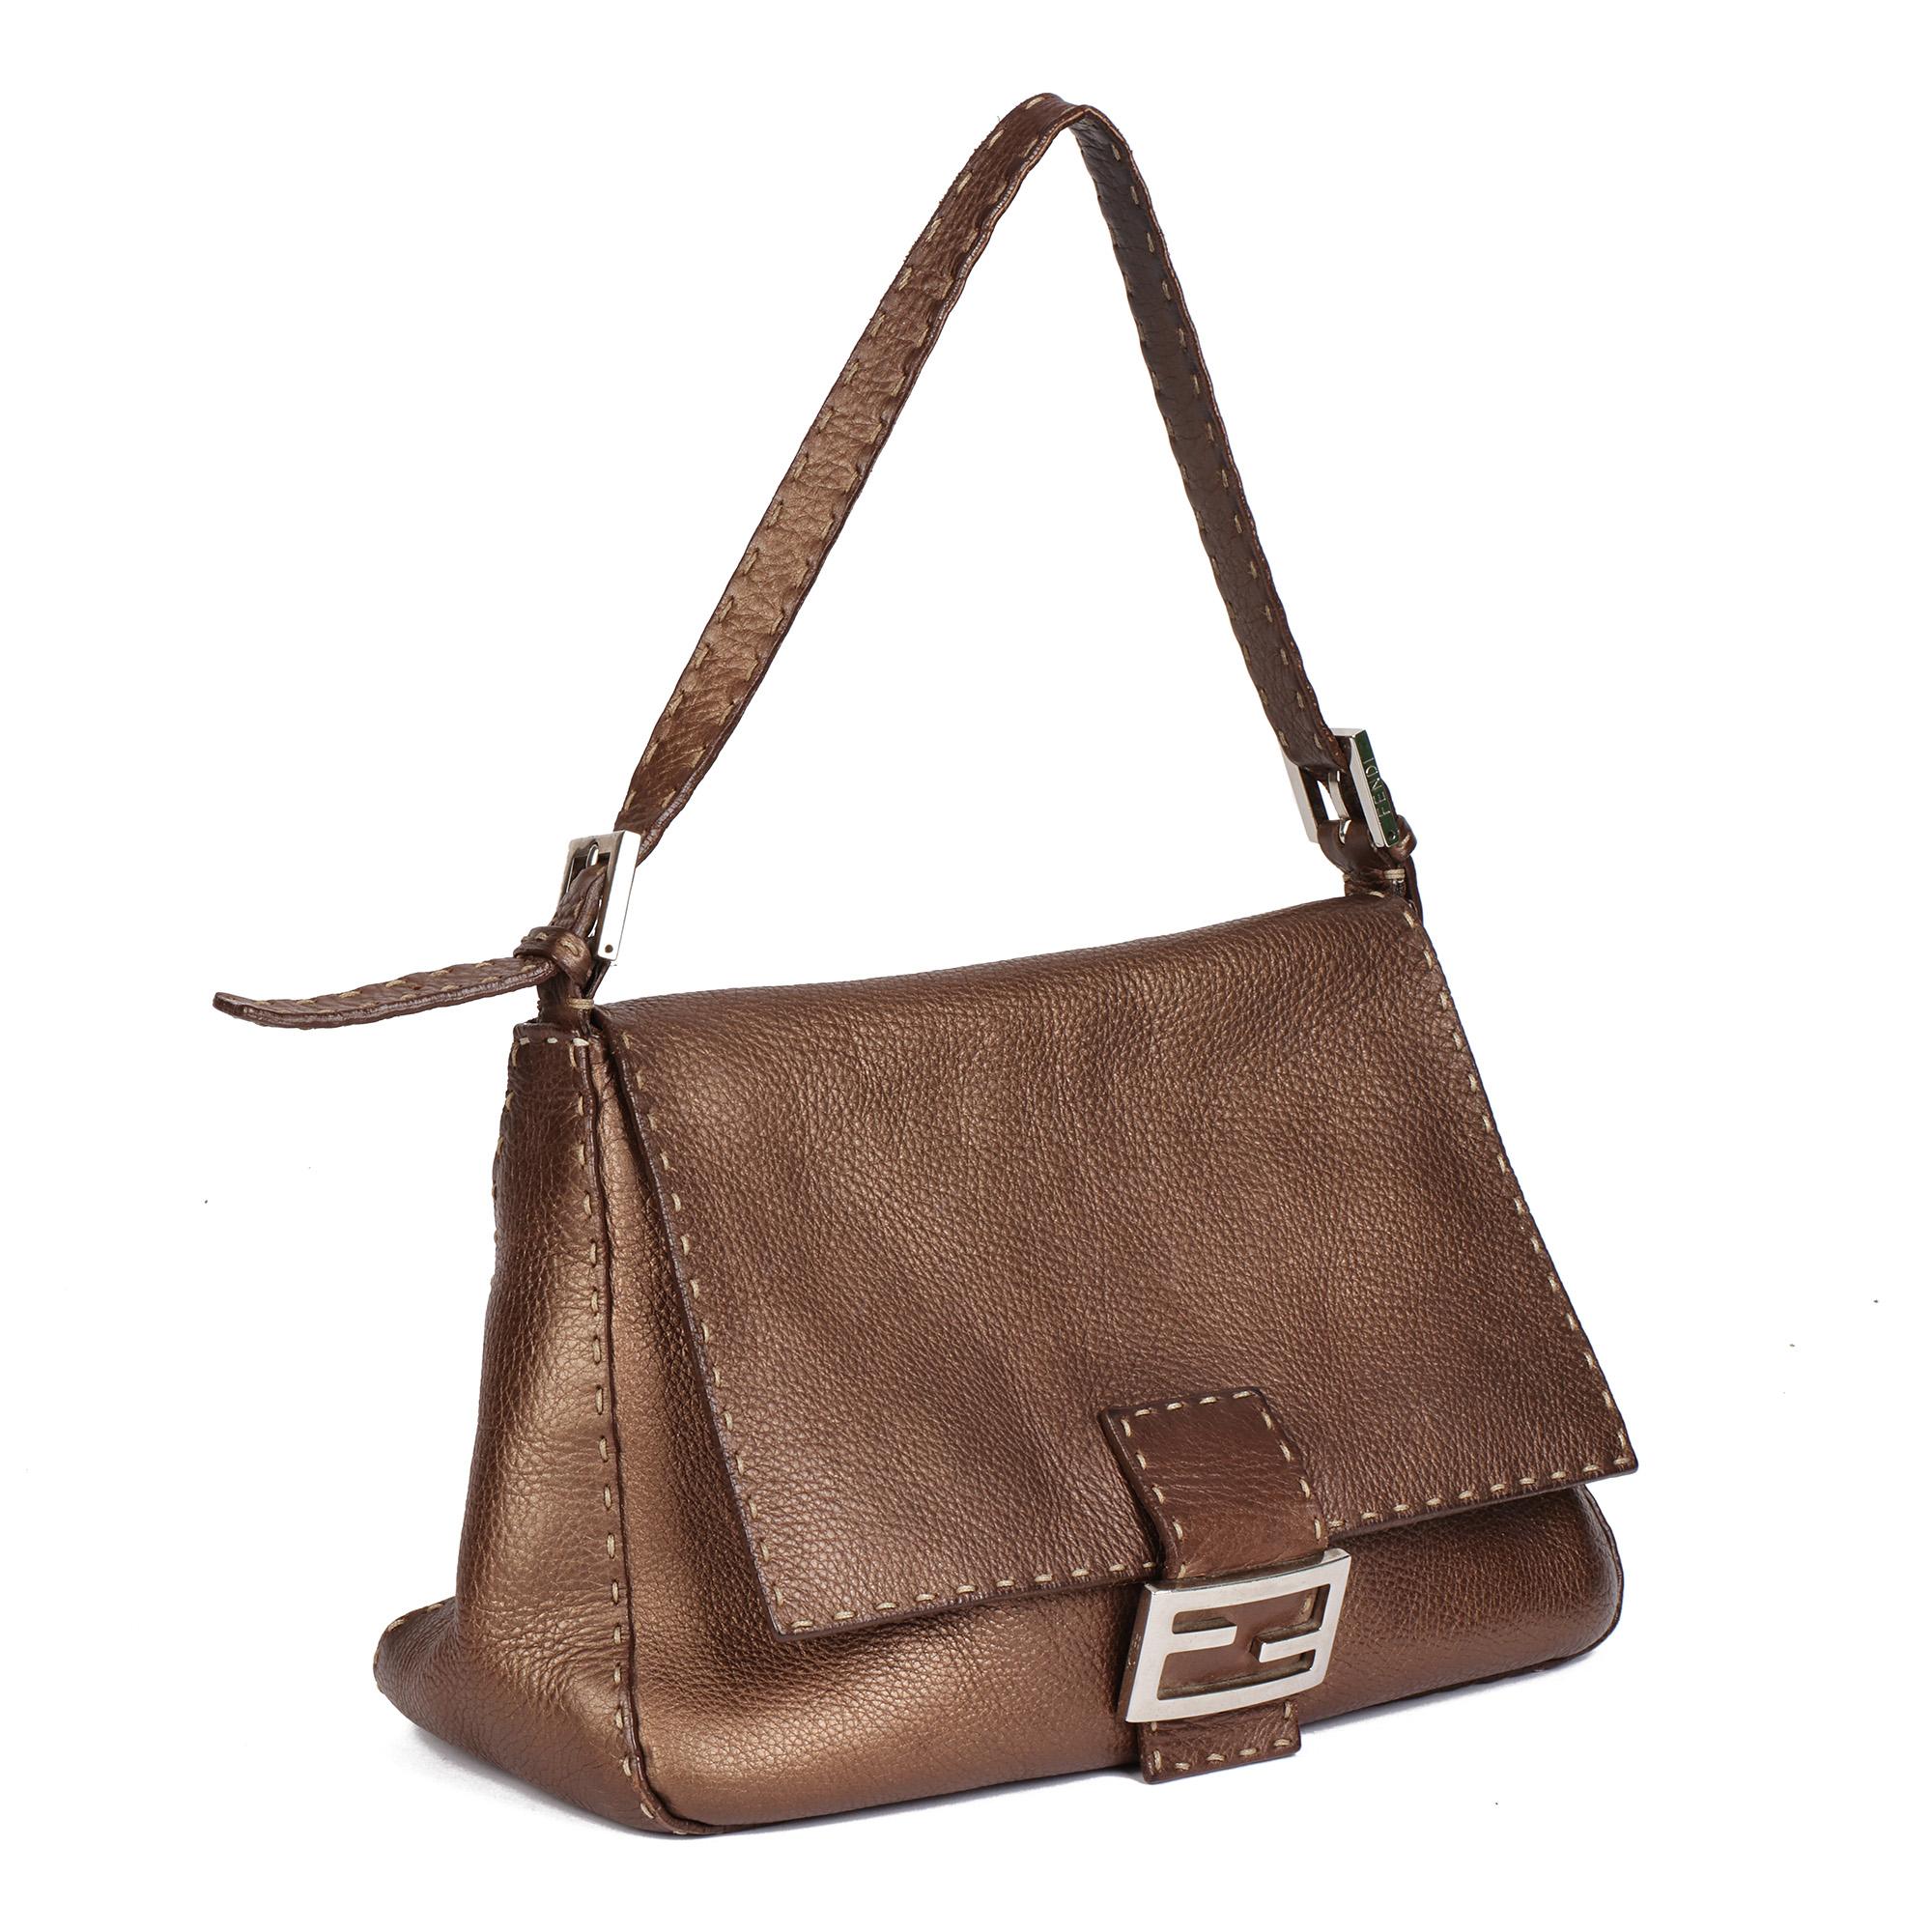 FENDI
Metallic Brown Calfskin Leather Mama Baguette

Serial Number: 2172.SE (unreadable)
Age (Circa): 2000
Authenticity Details: Date Stamp (Made in Italy)
Gender: Ladies
Type: Top Handle, Shoulder

Colour: Bronze
Hardware: Silver
Material(s):